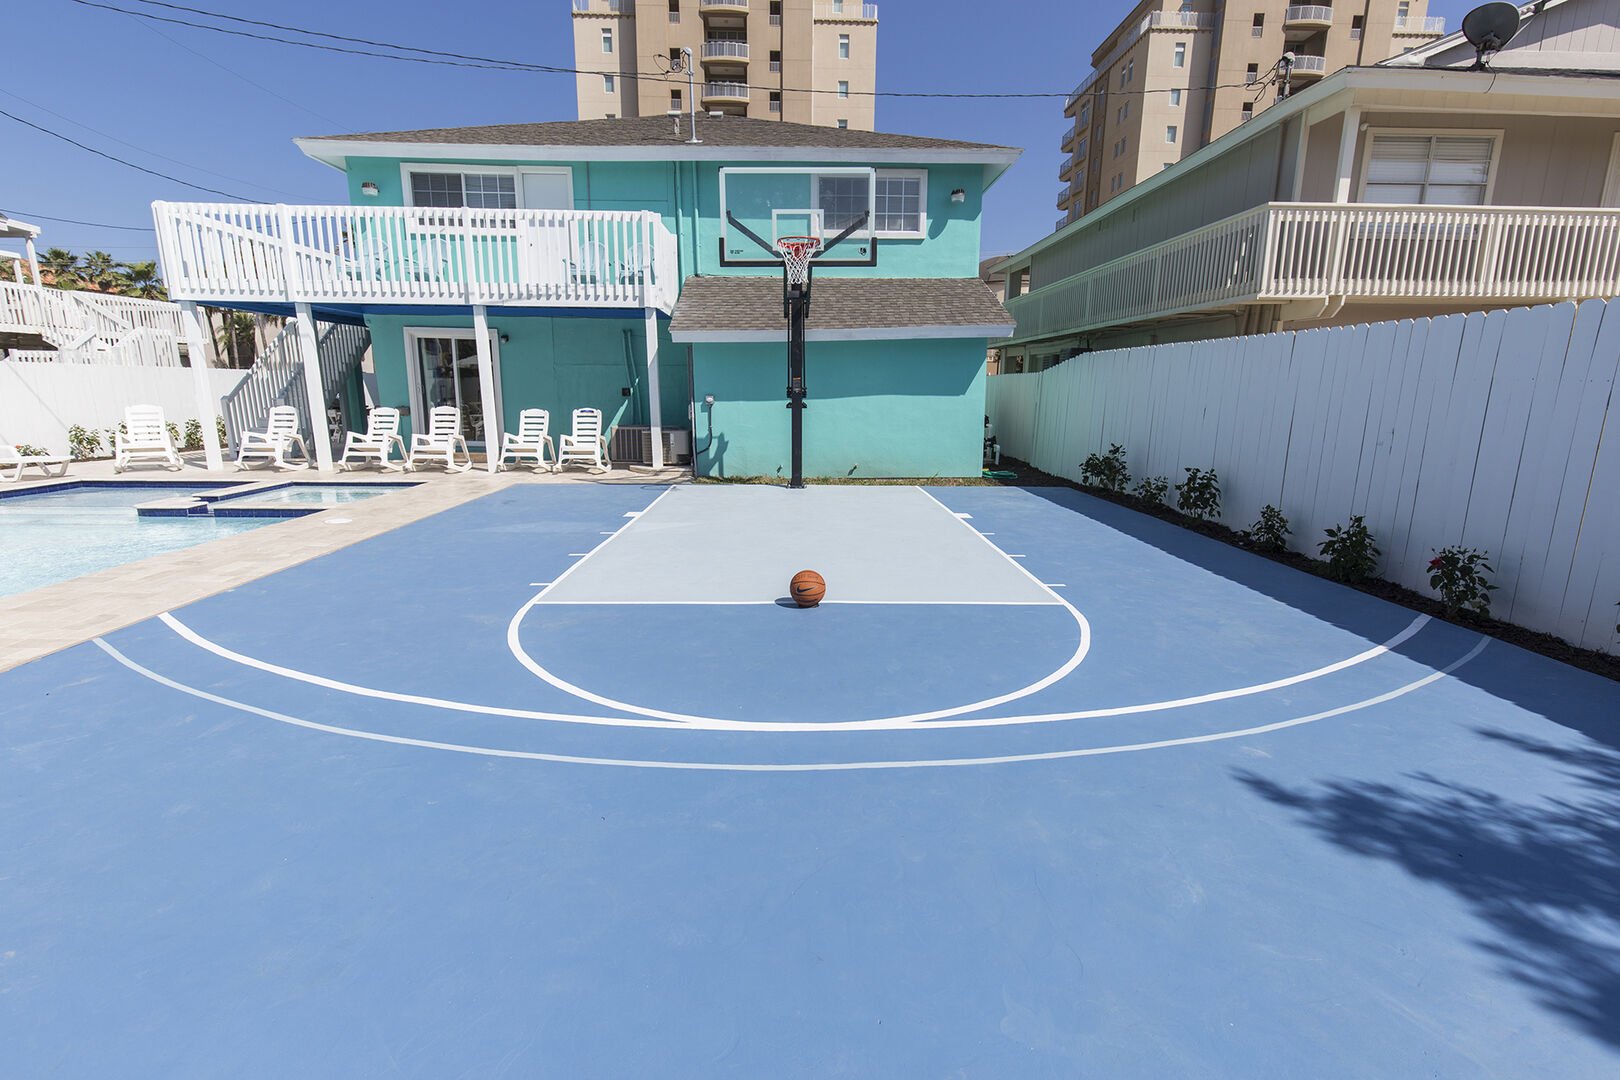 The Top 11 Apartments With Basketball Courts in Houston - Lighthouse